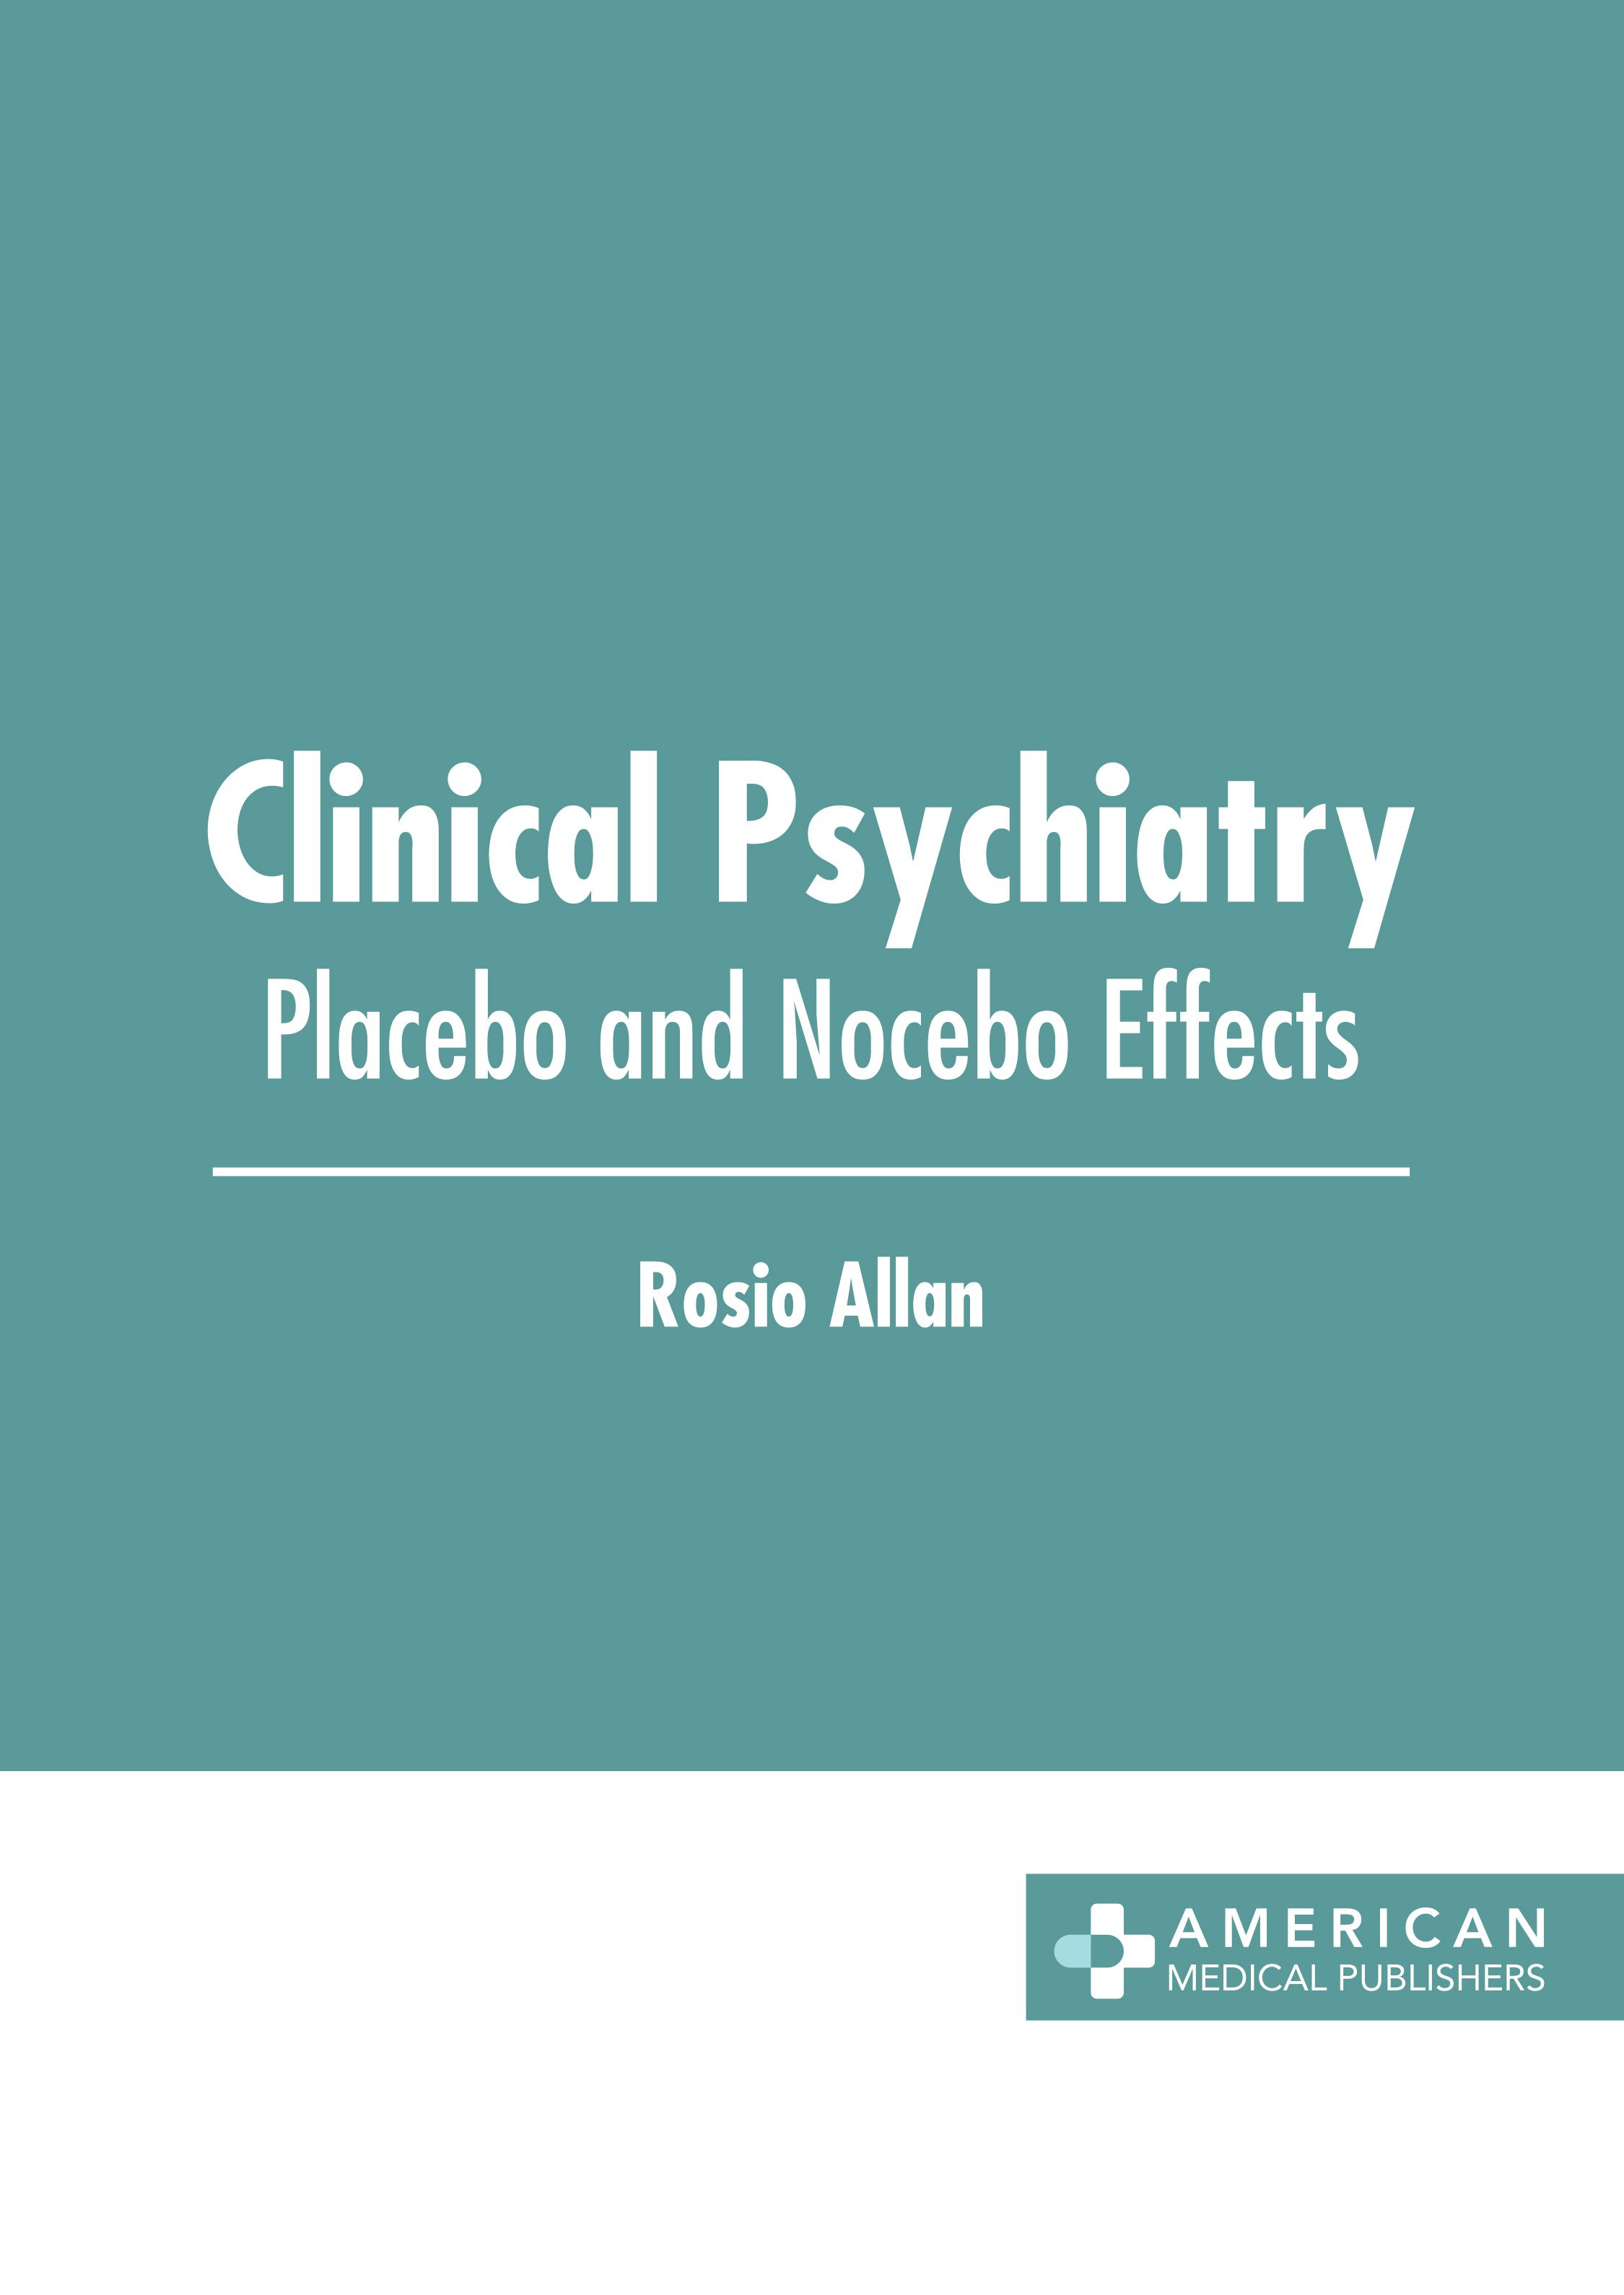 CLINICAL PSYCHIATRY: PLACEBO AND NOCEBO EFFECTS